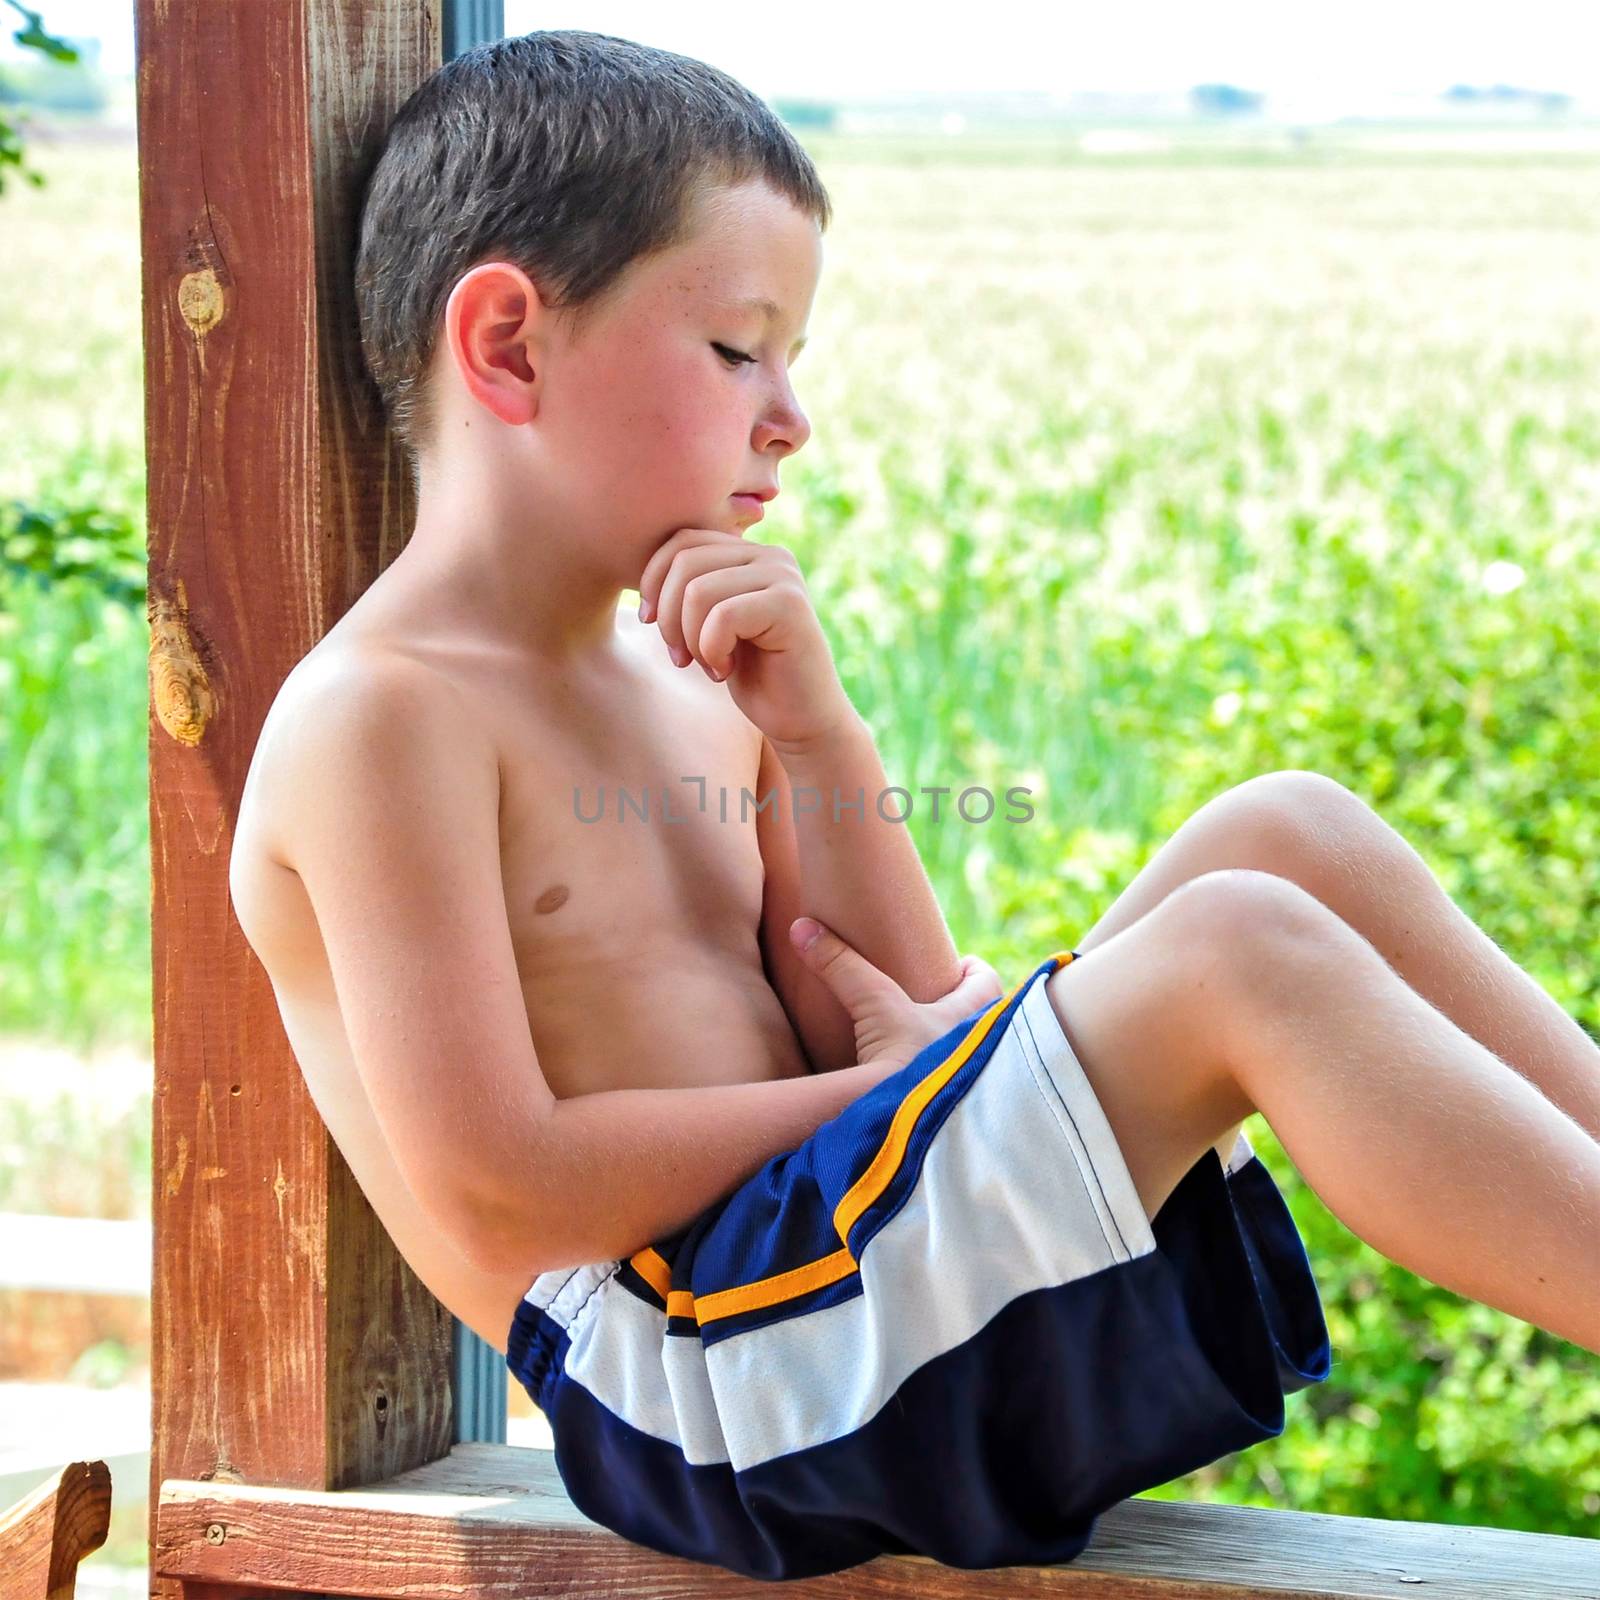 Small Boy Taking a Break on a Hot Summer Day by rcarner